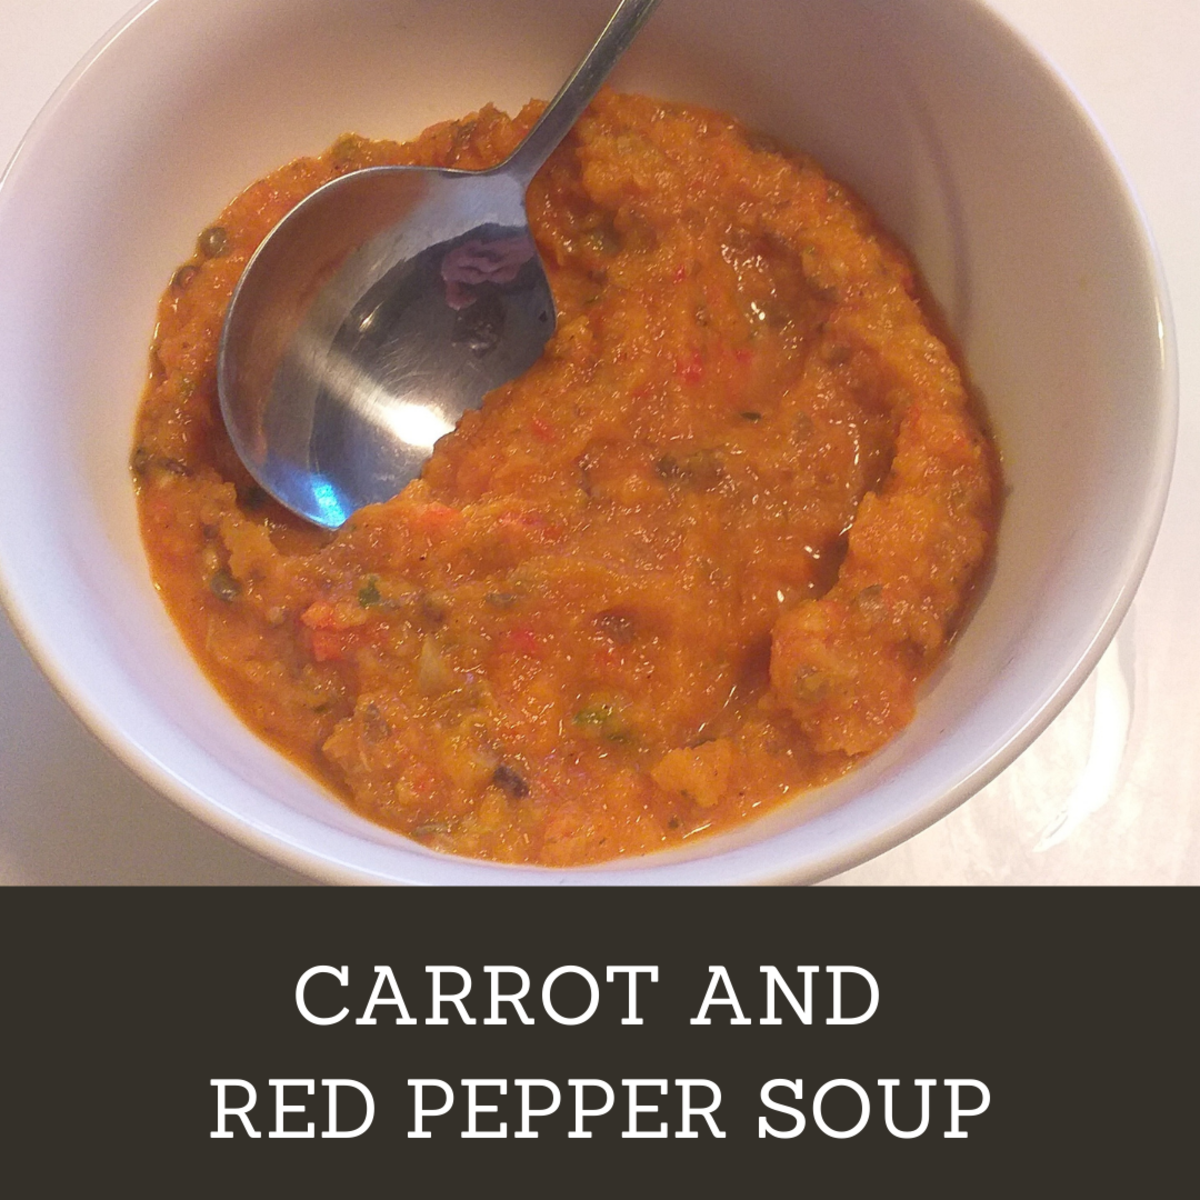 Homemade carrot and red pepper soup.